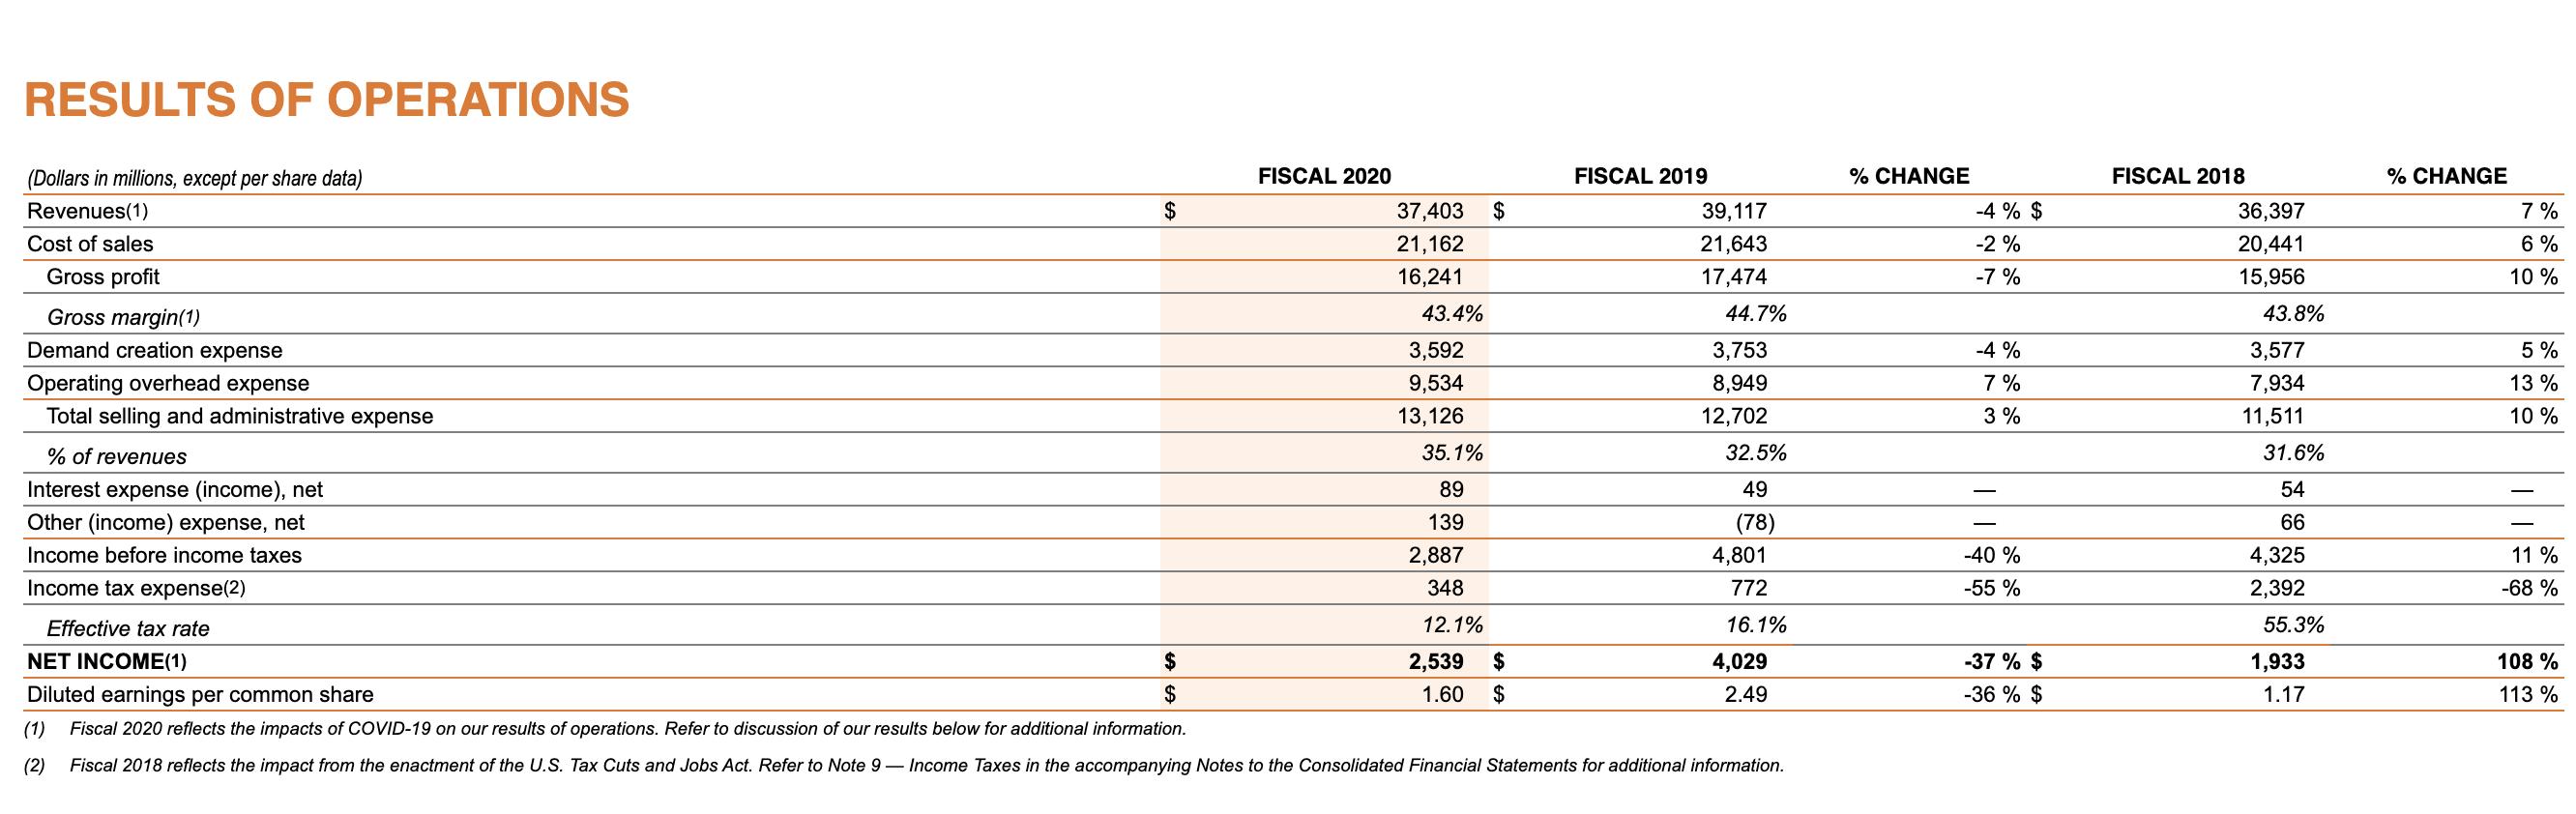 RESULTS OF OPERATIONS FISCAL 2018 % CHANGE $$ FISCAL 2020 37,403 21,162 16,241 FISCAL 2019 39,117 21,643 17,474 % CHANGE -4